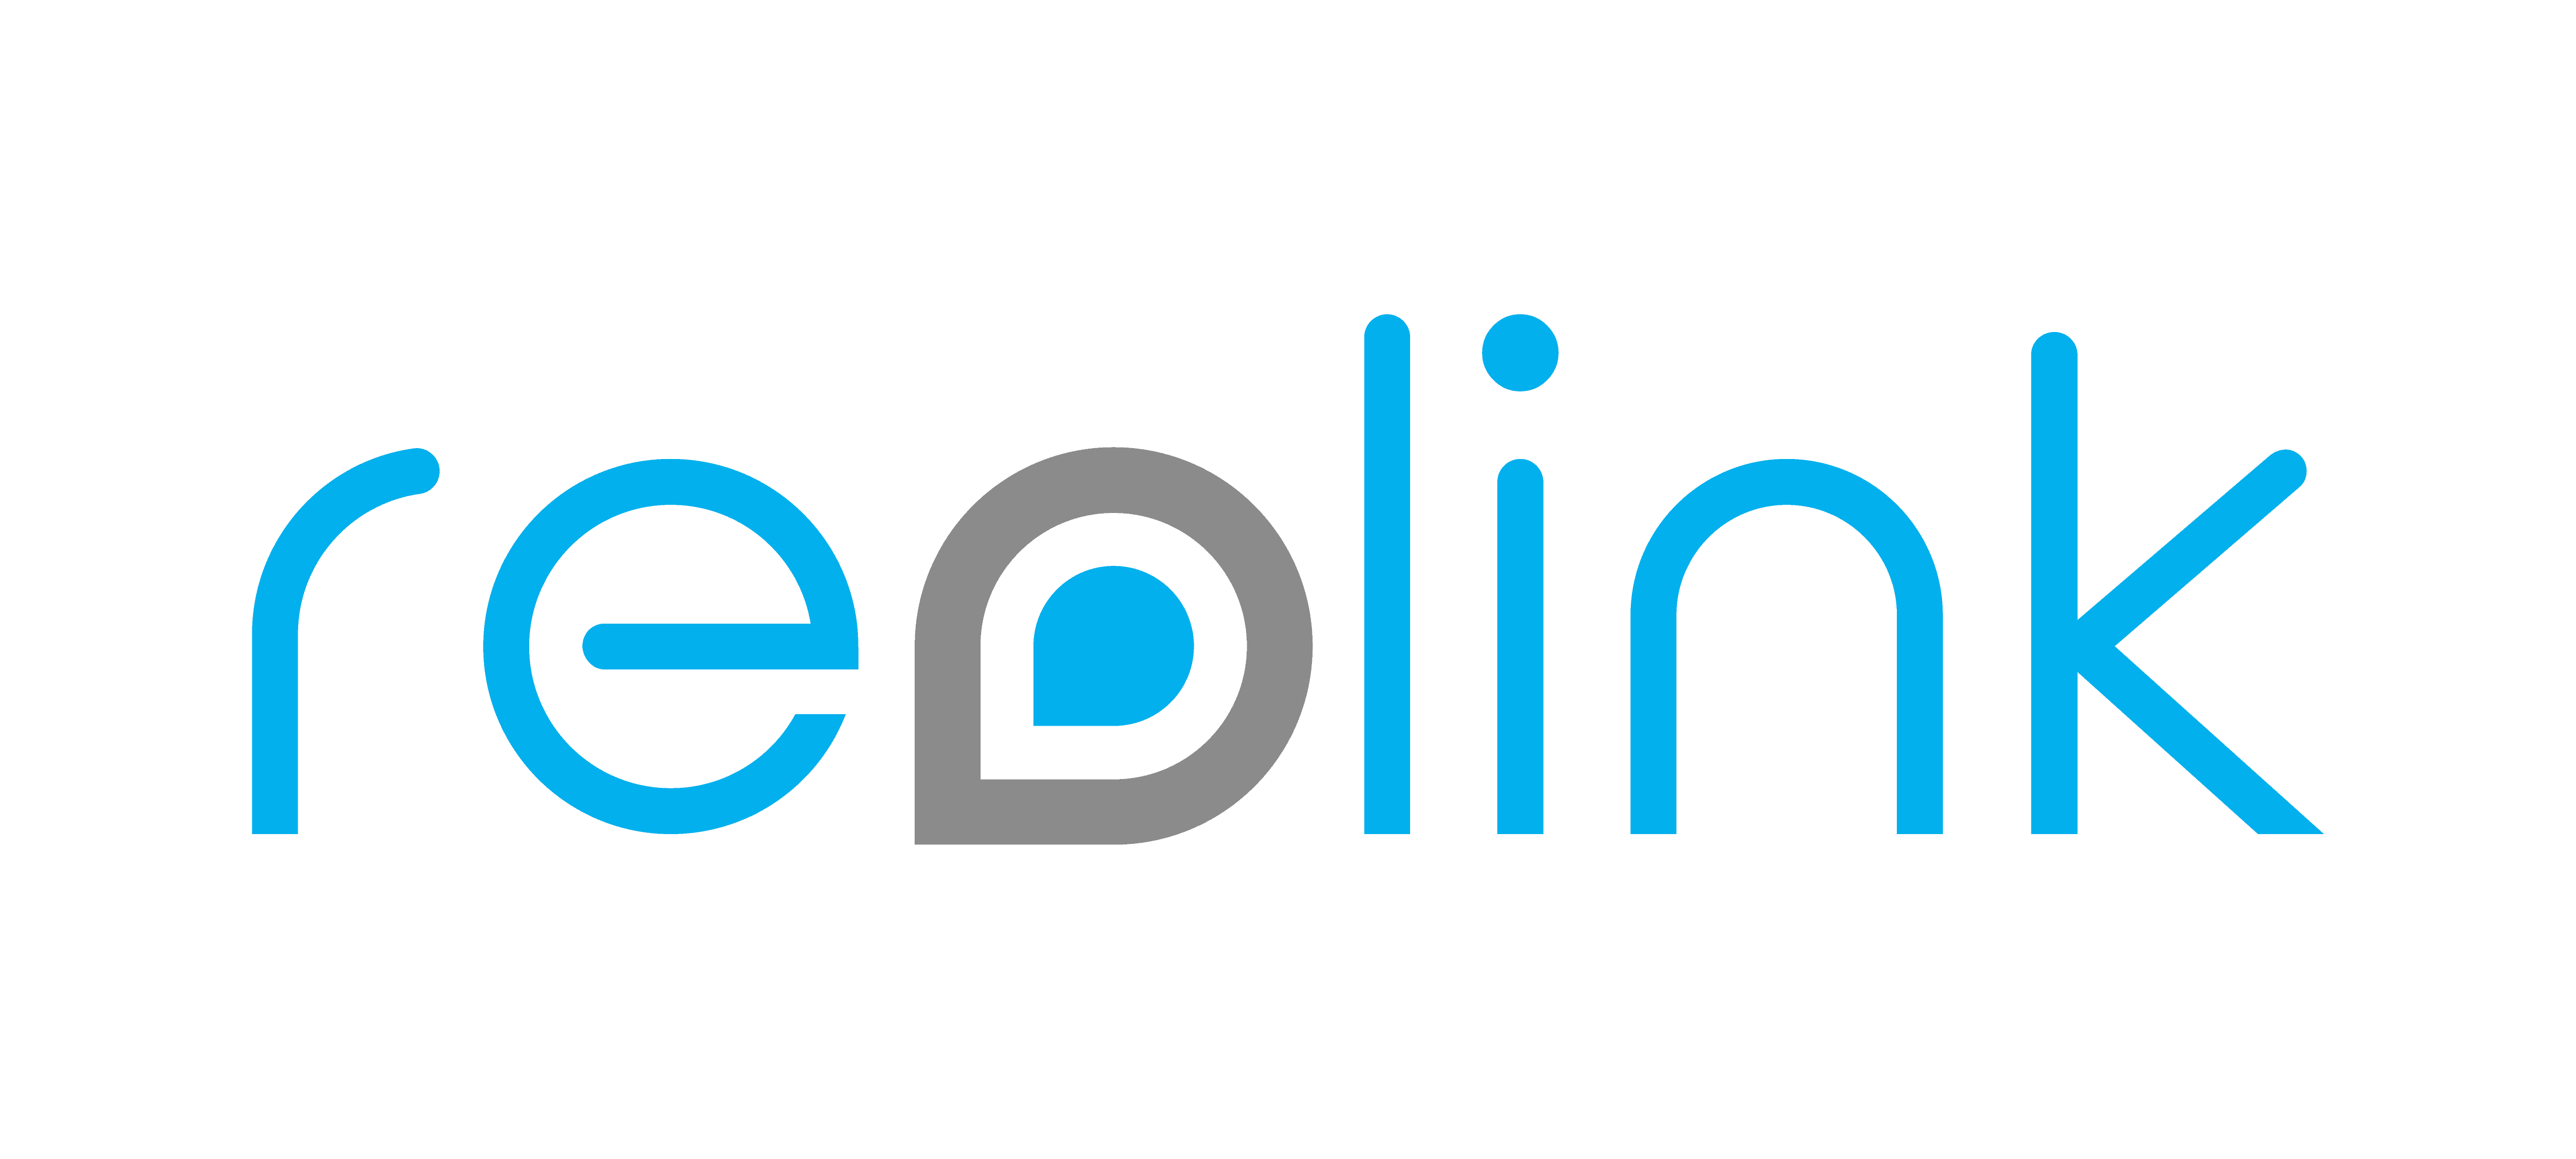 Reolink Product Logo